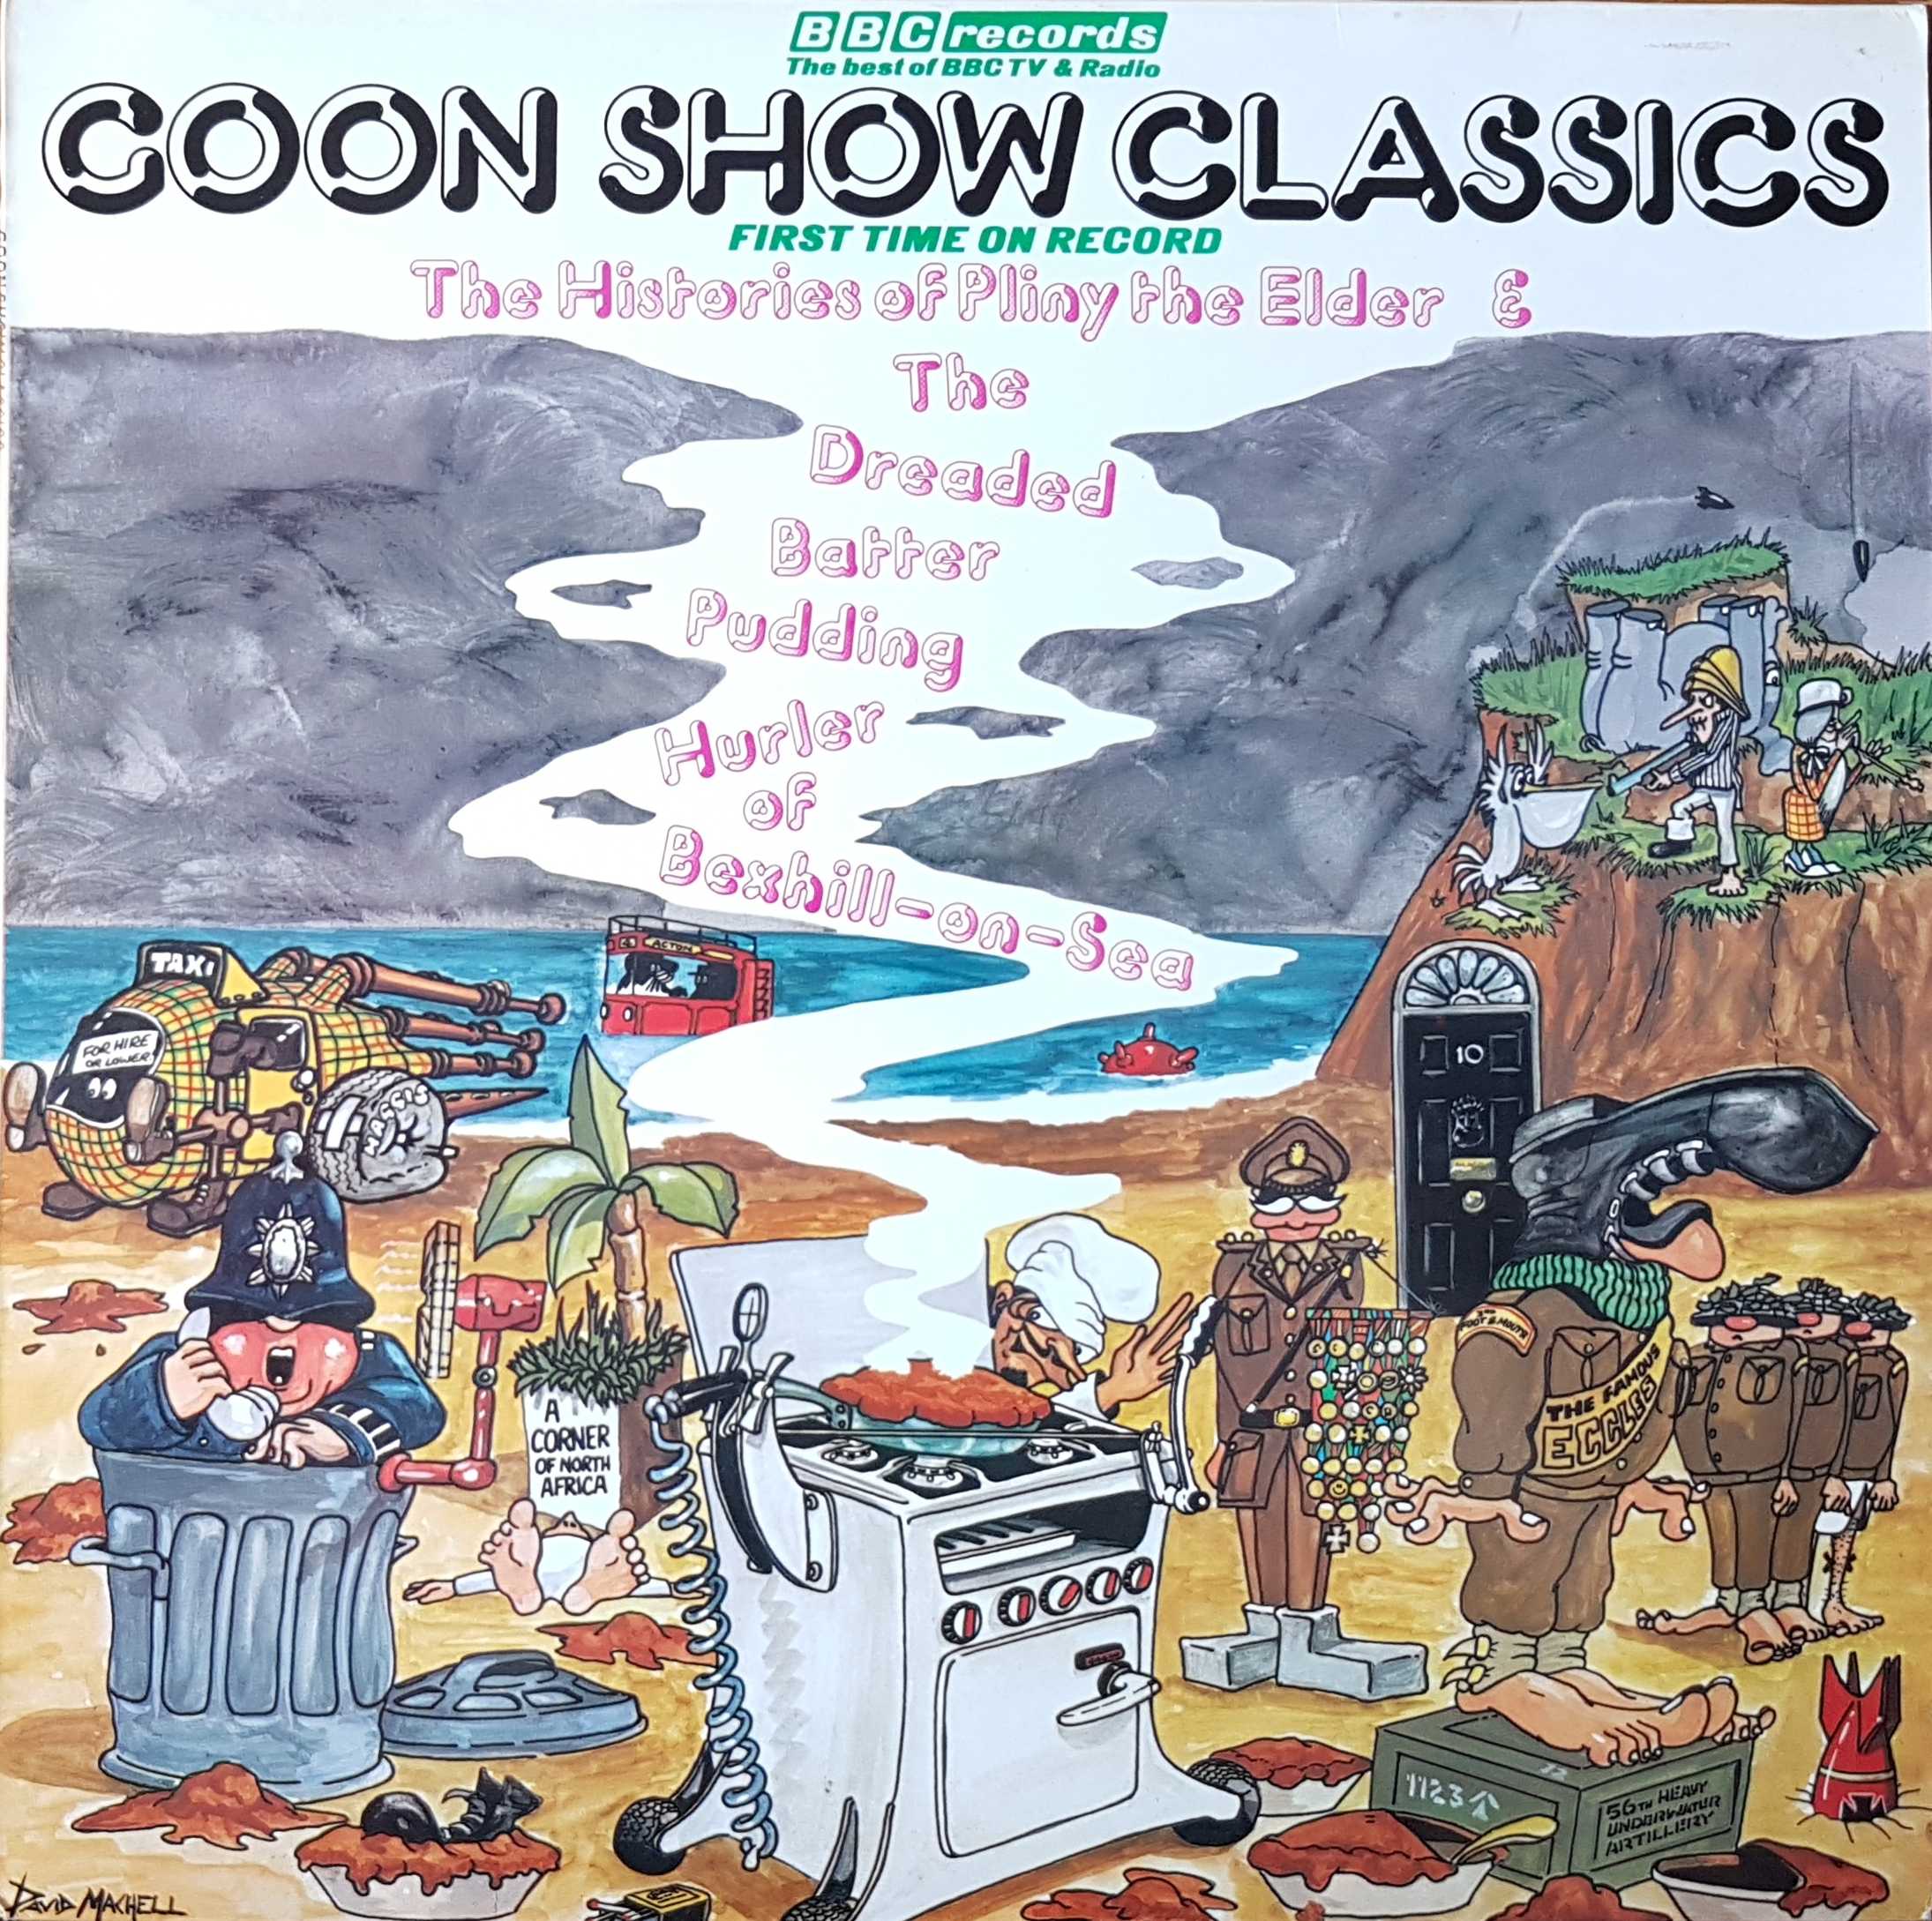 Picture of REB 177 Goon show classics by artist Spike Milligan from the BBC albums - Records and Tapes library